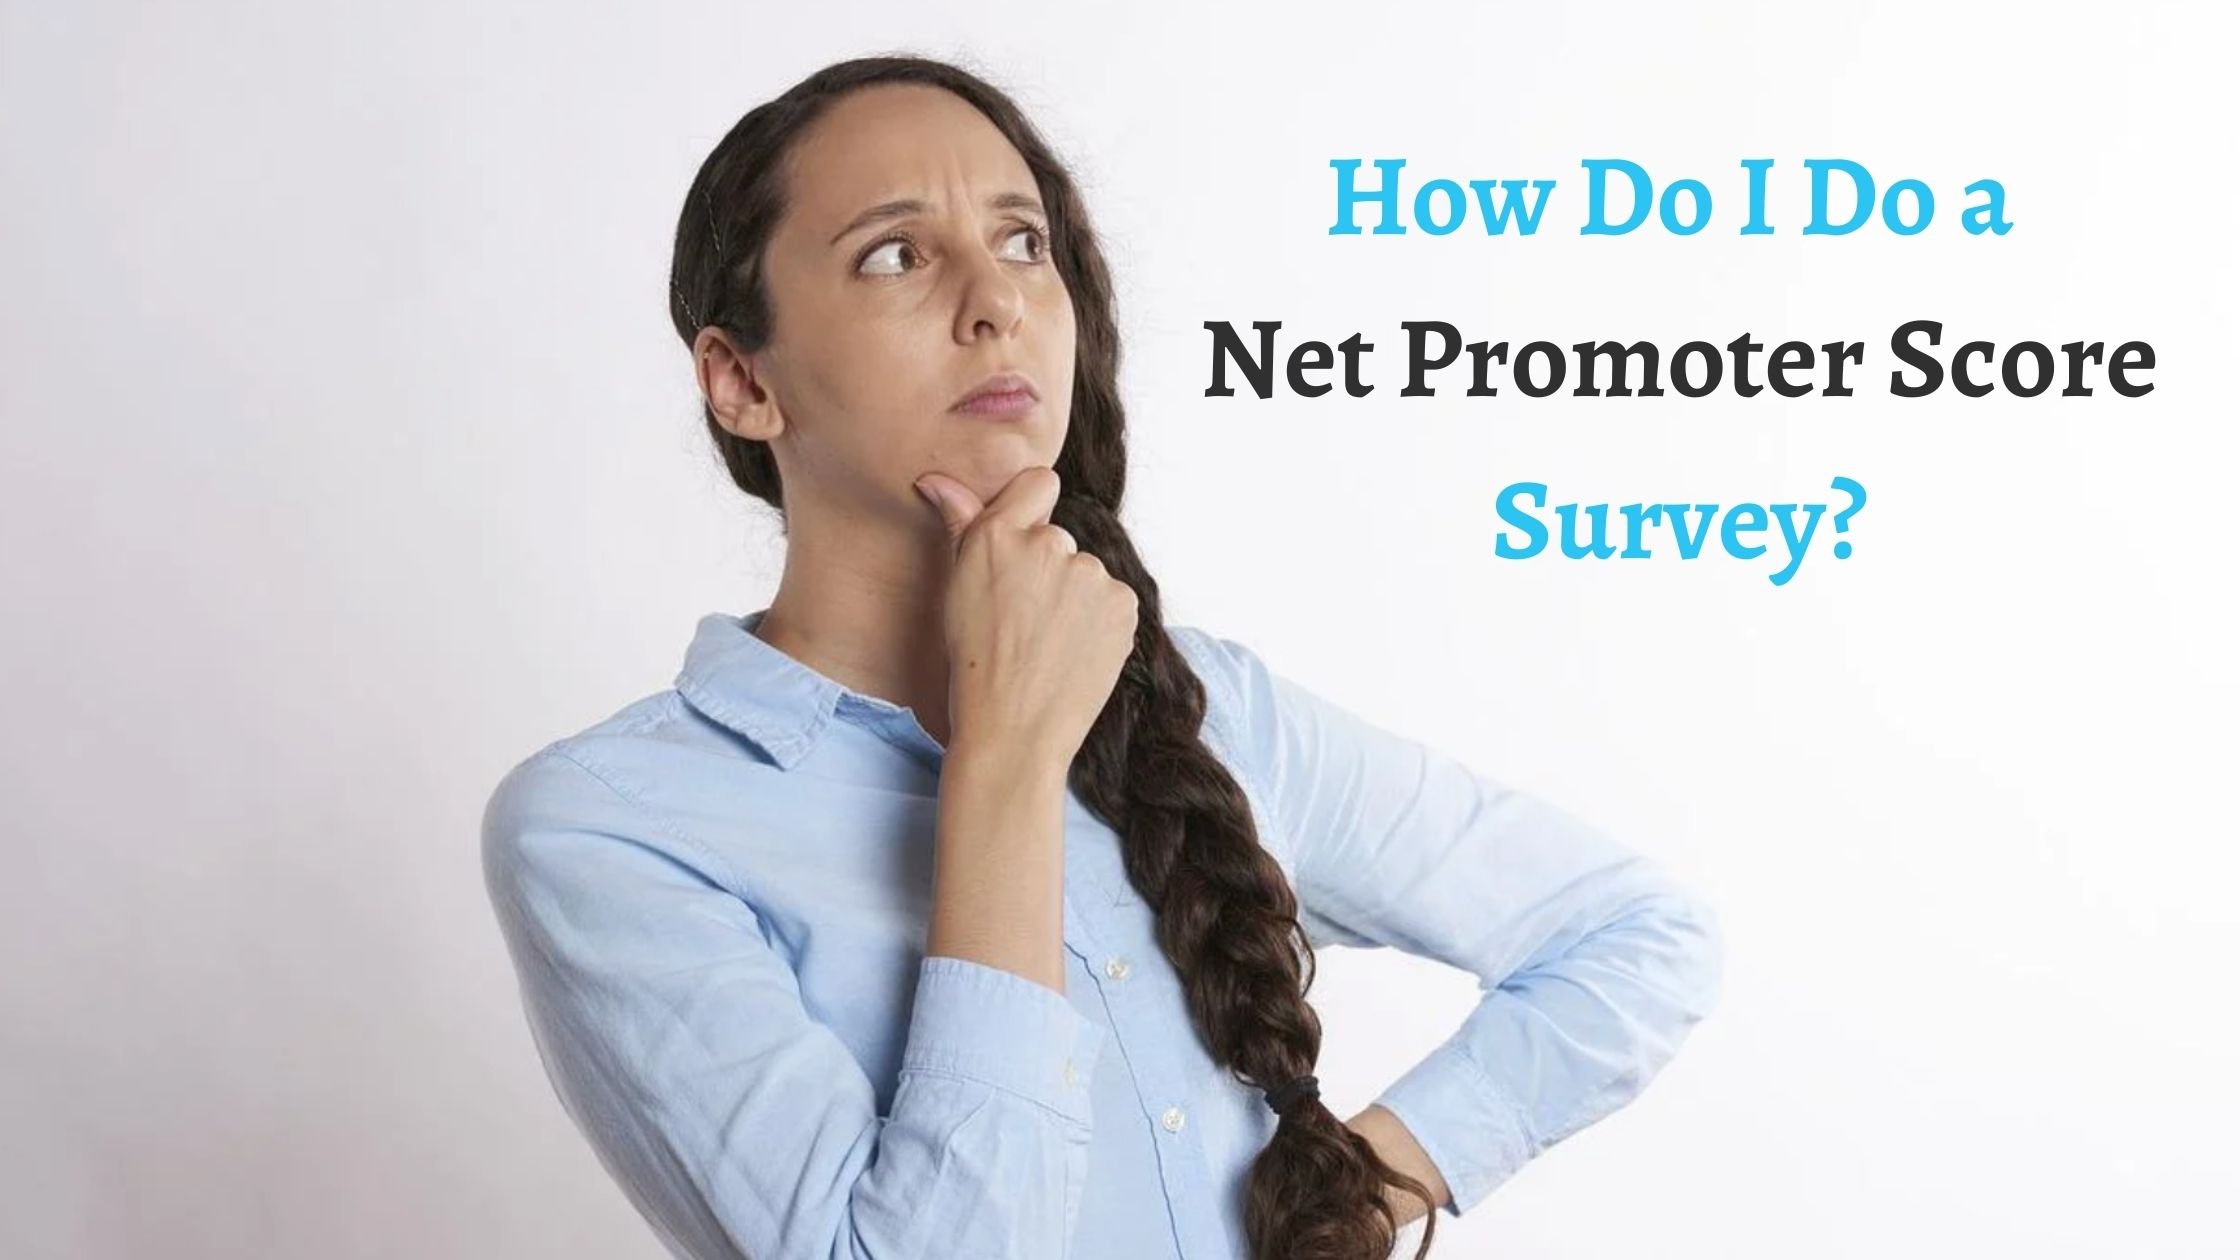 How to Get More From Your Net Promoter Score?